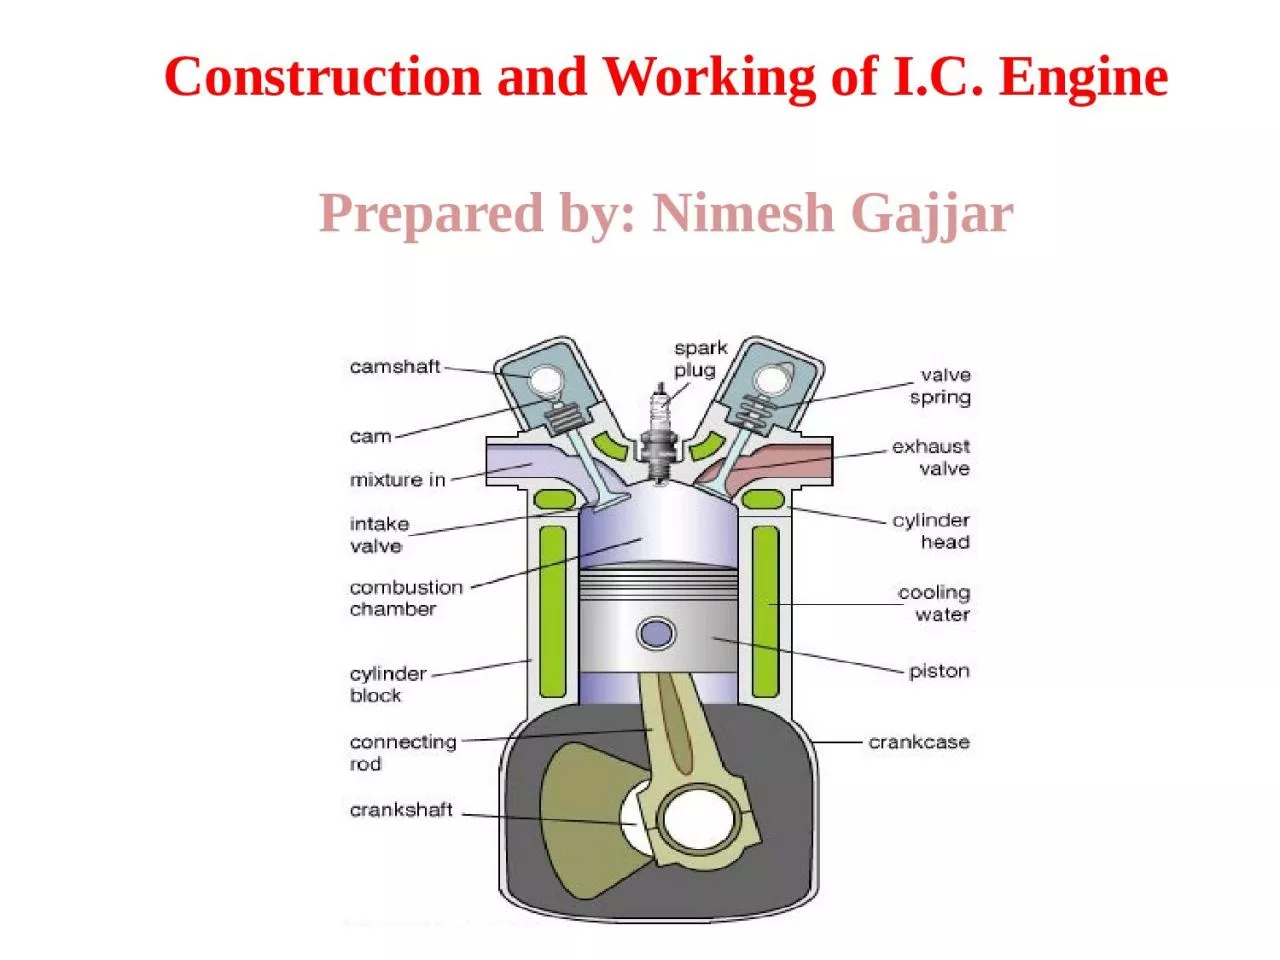 Construction and Working of I.C. Engine